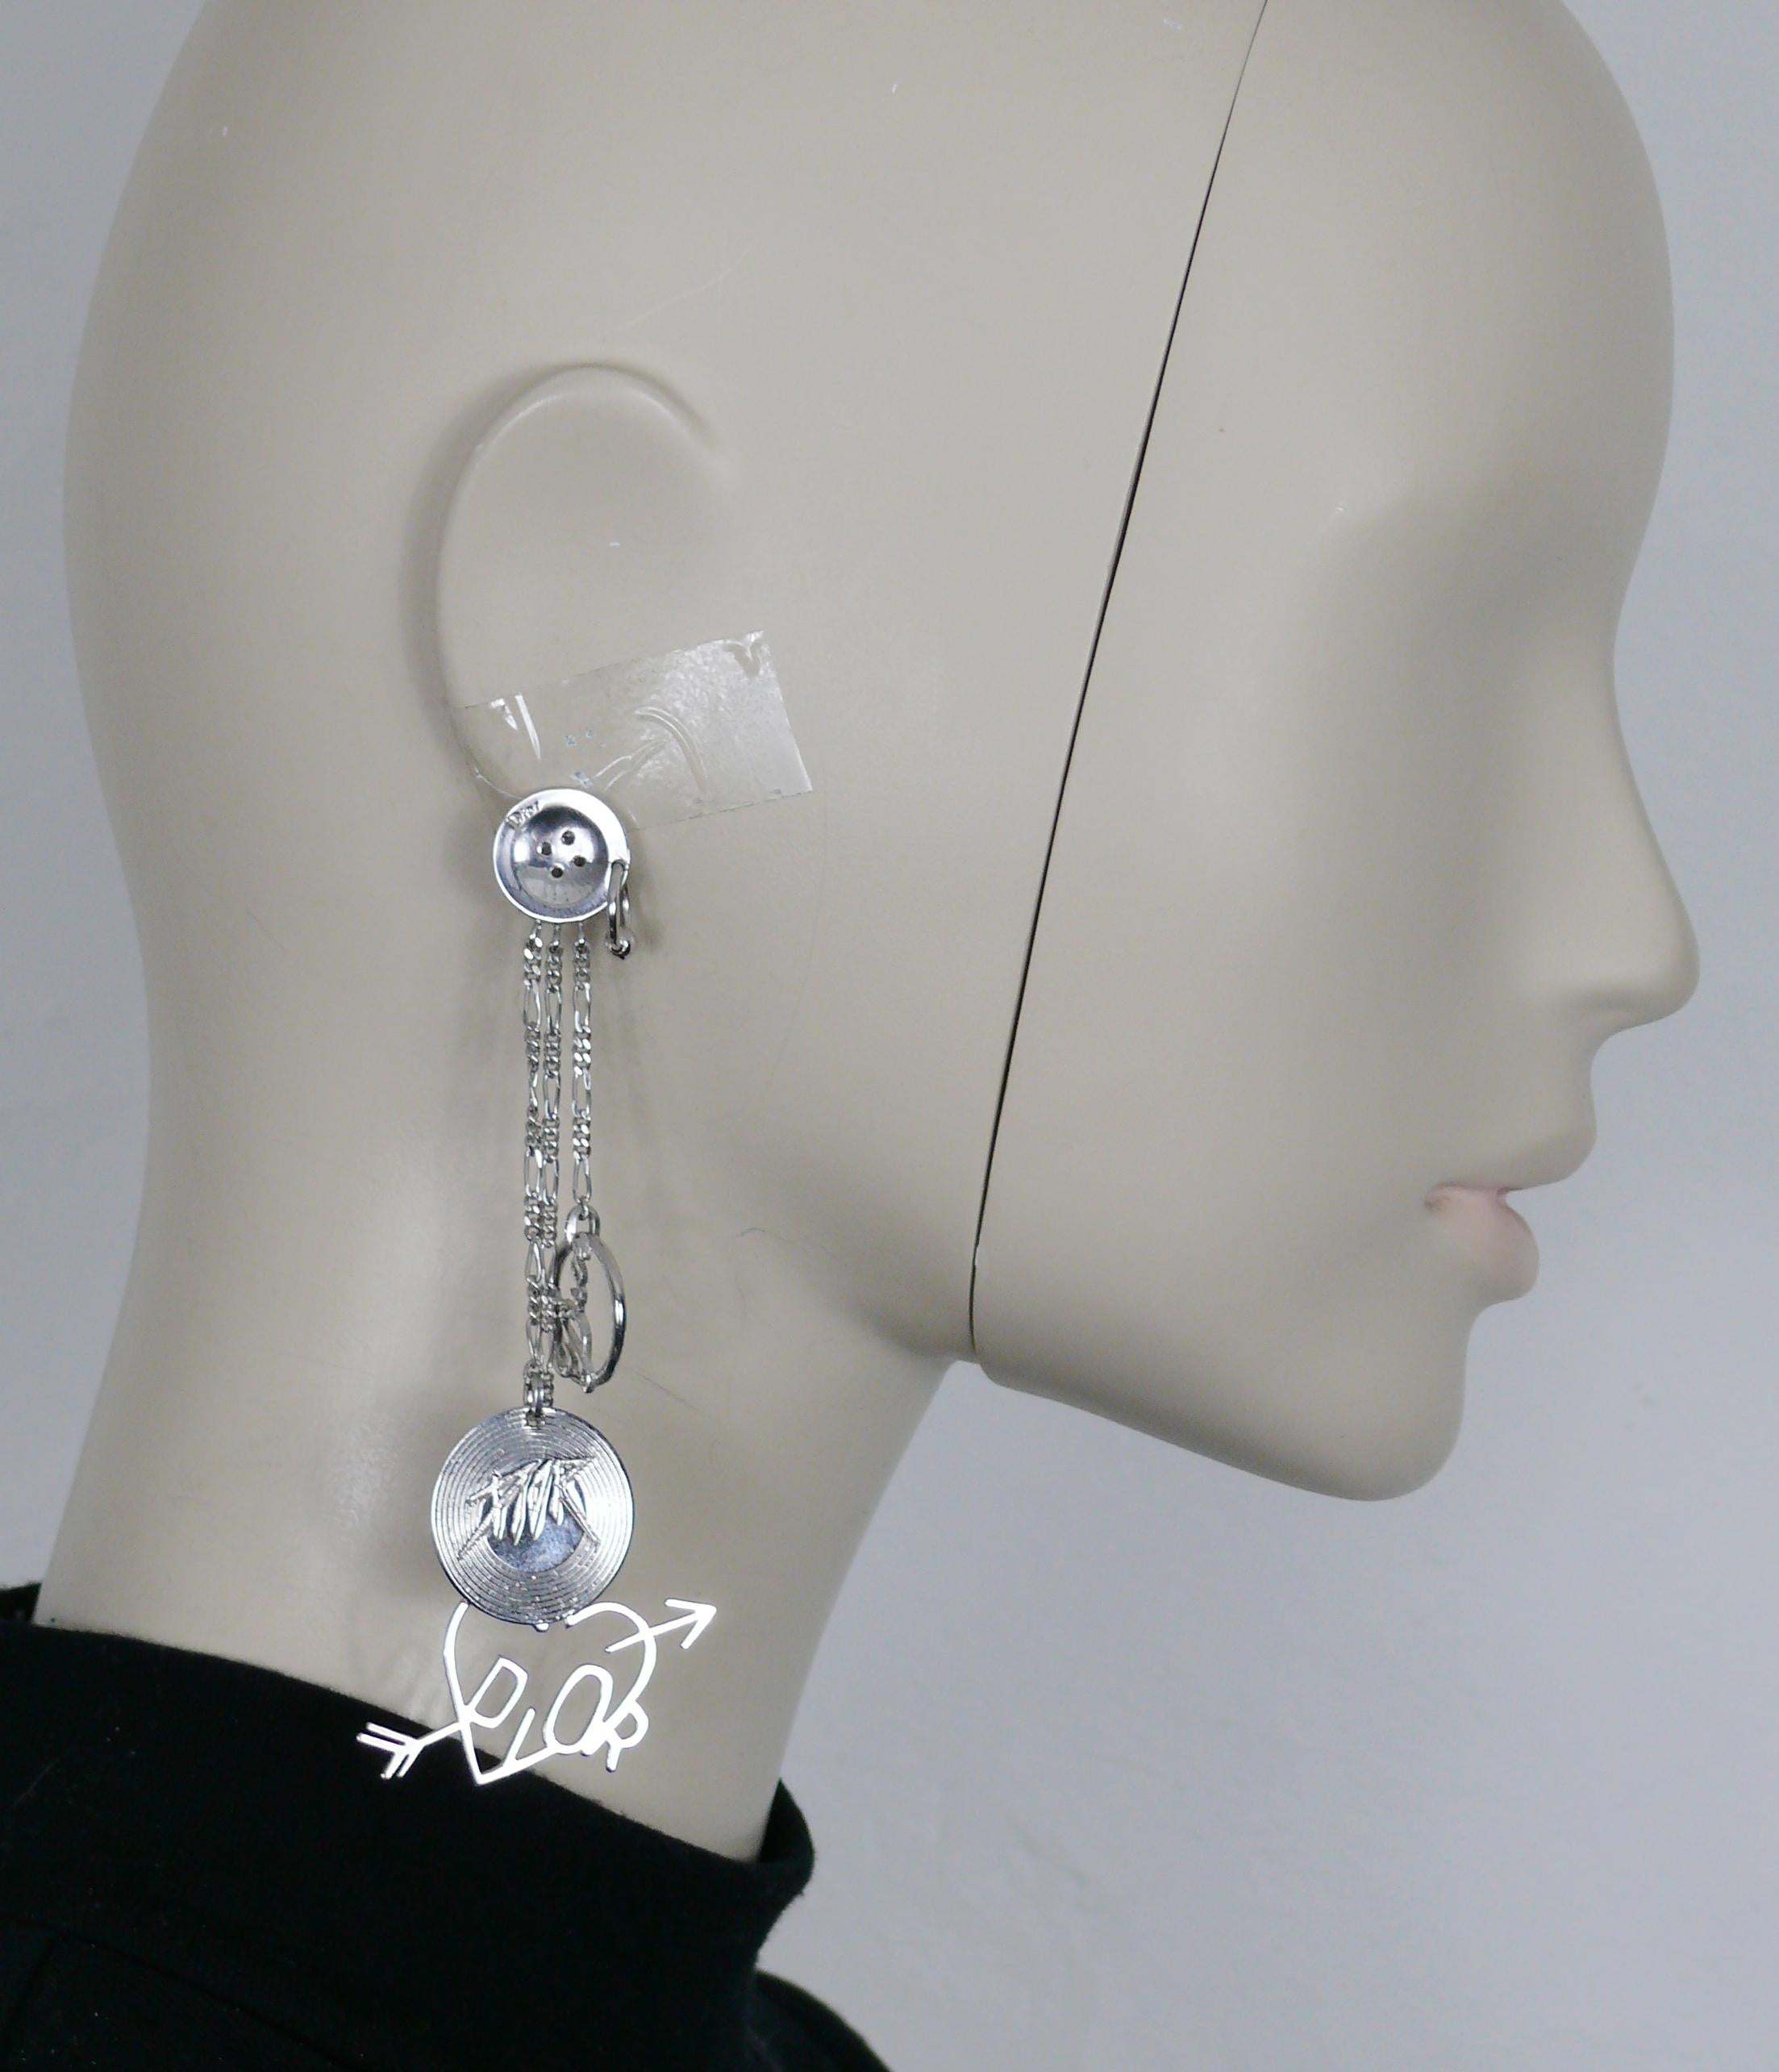 CHRISTIAN DIOR by JOHN GALLIANO vintage silver tone dangling earrings (clip-on) featuring a pierced button top, three chains with charms : a record embossed DIOR, heart and DIOR signature medallion.

Embossed DIOR.

Indicative measurements : max.